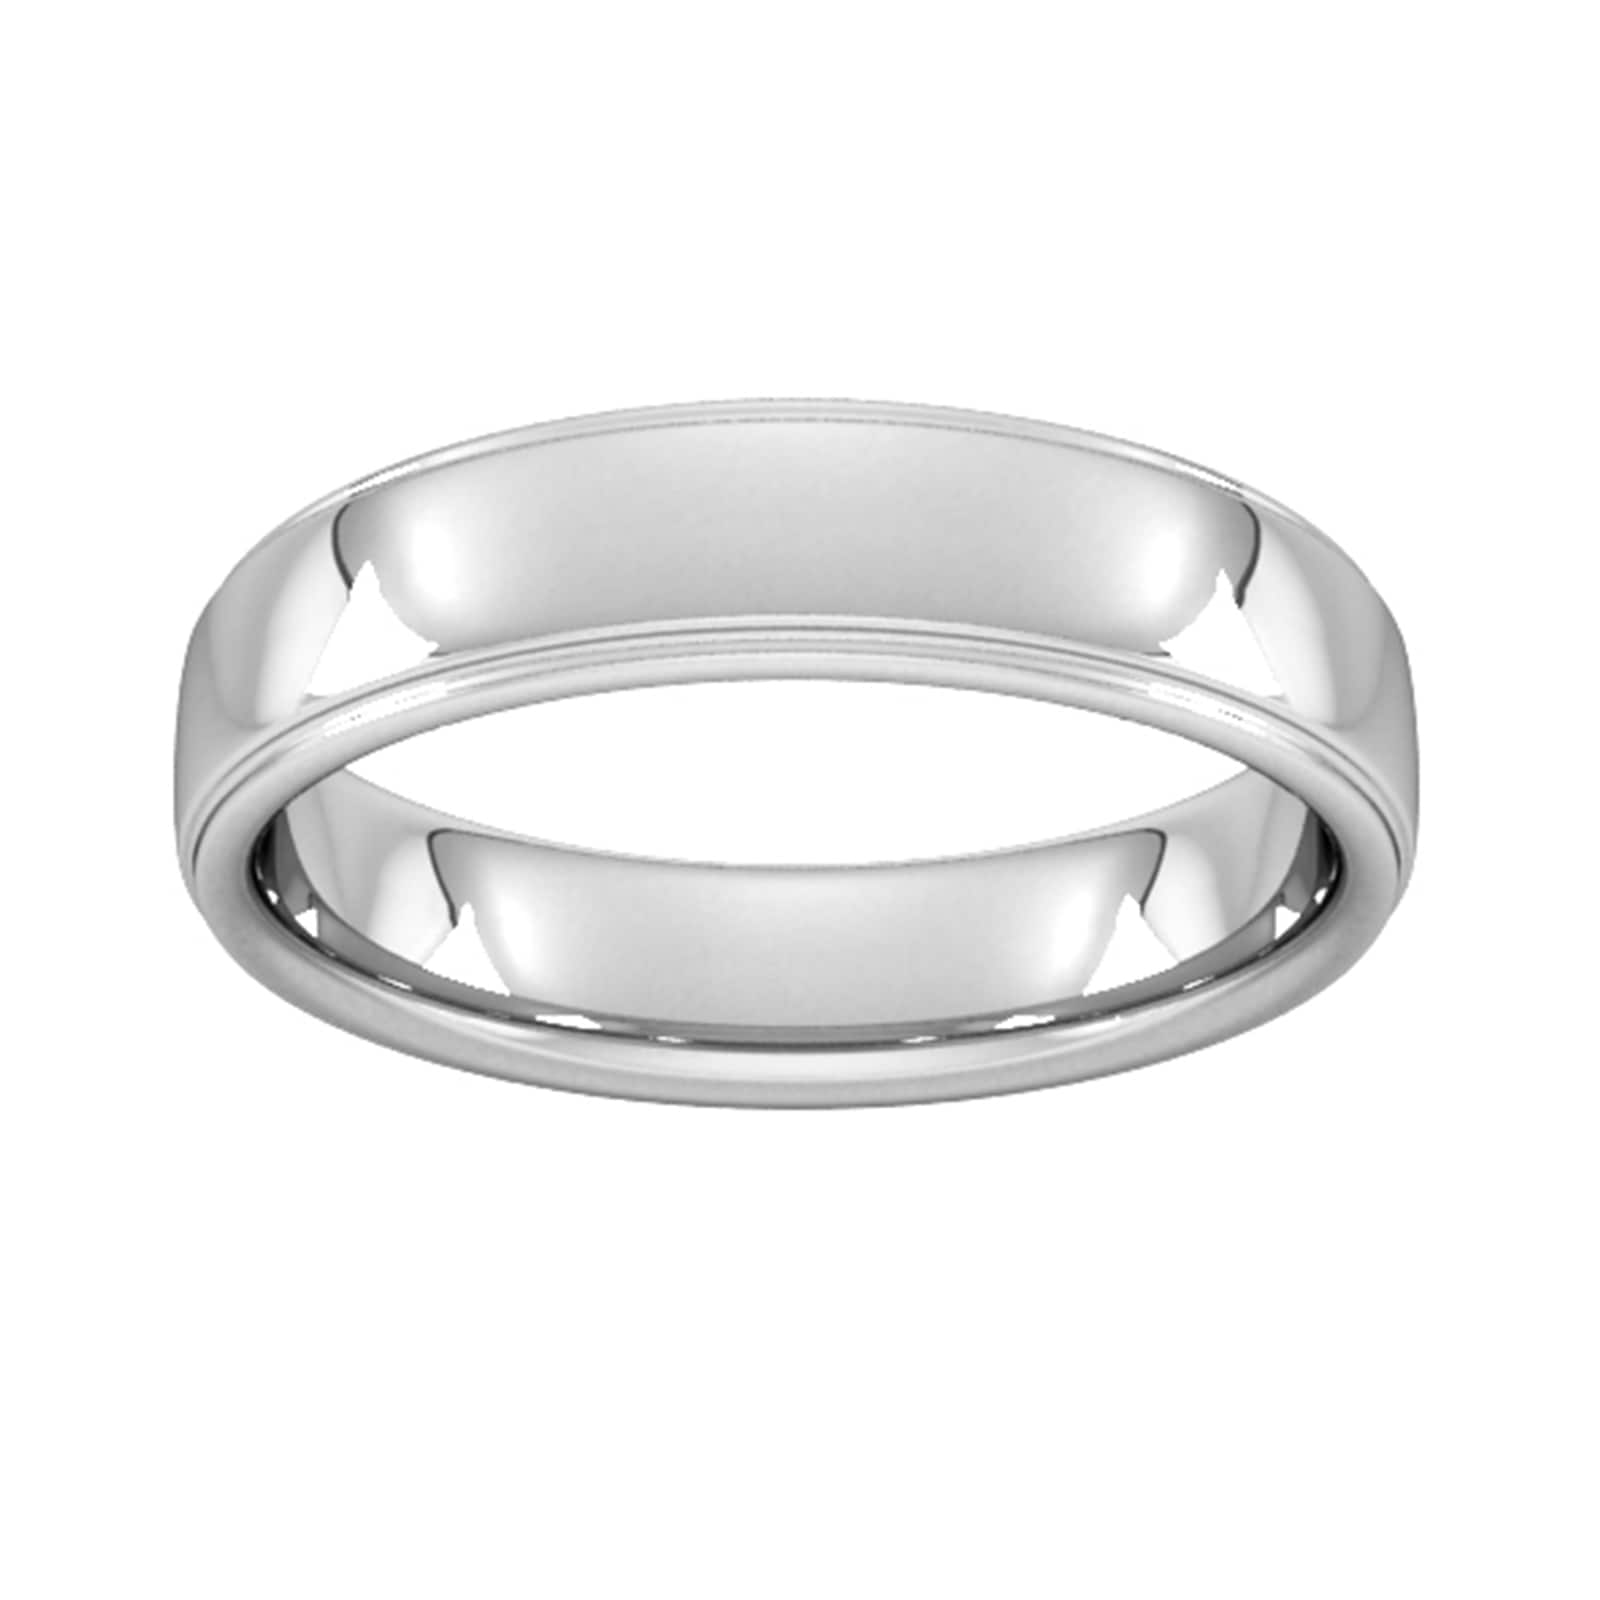 5mm Slight Court Extra Heavy Polished Finish With Grooves Wedding Ring In 950 Palladium - Ring Size Y